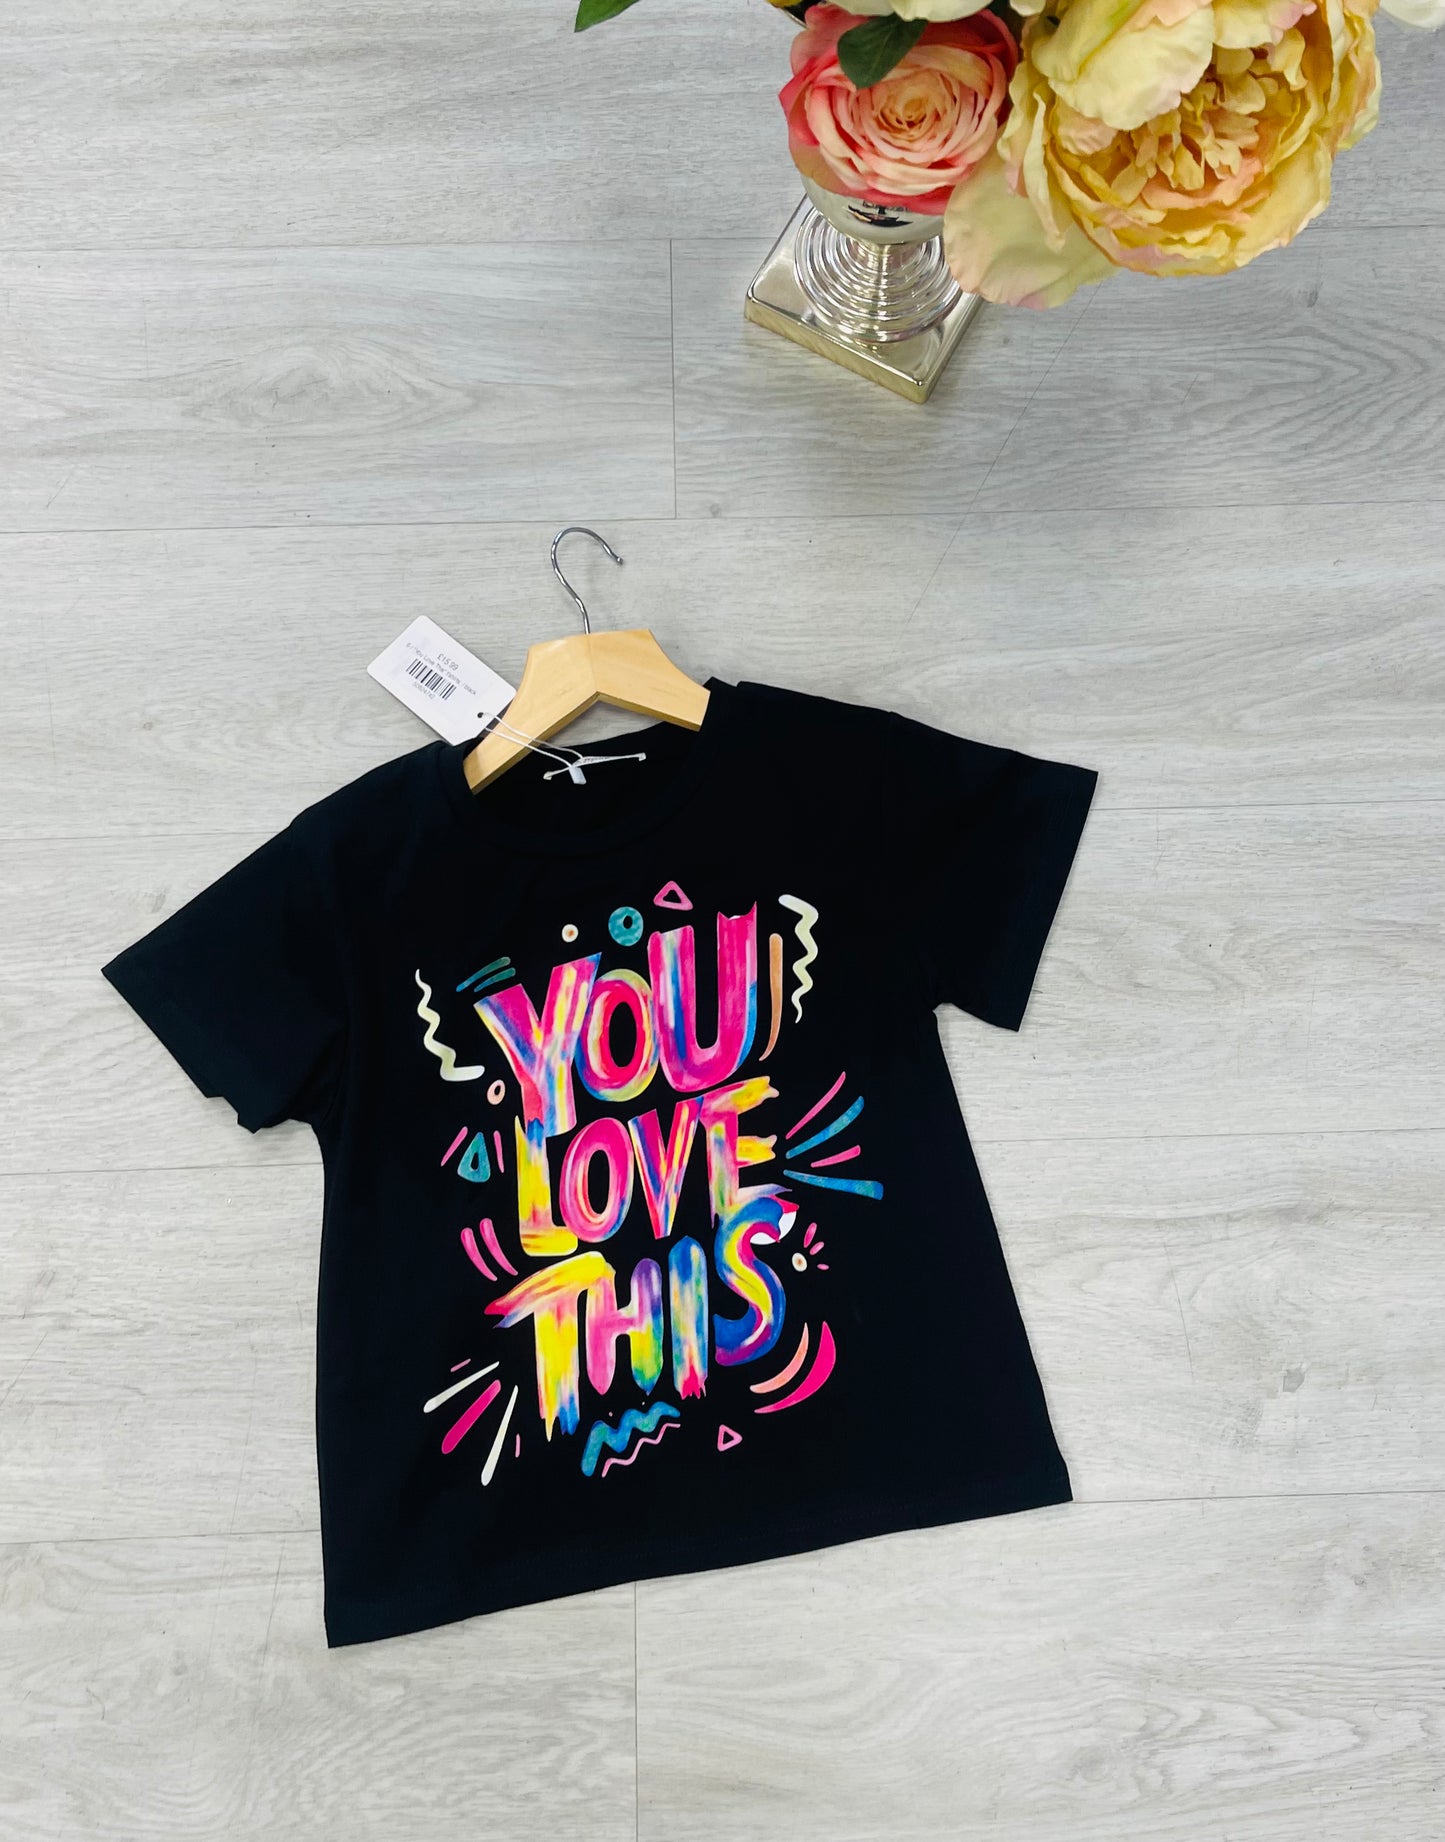 "You Love This" t'shirts.